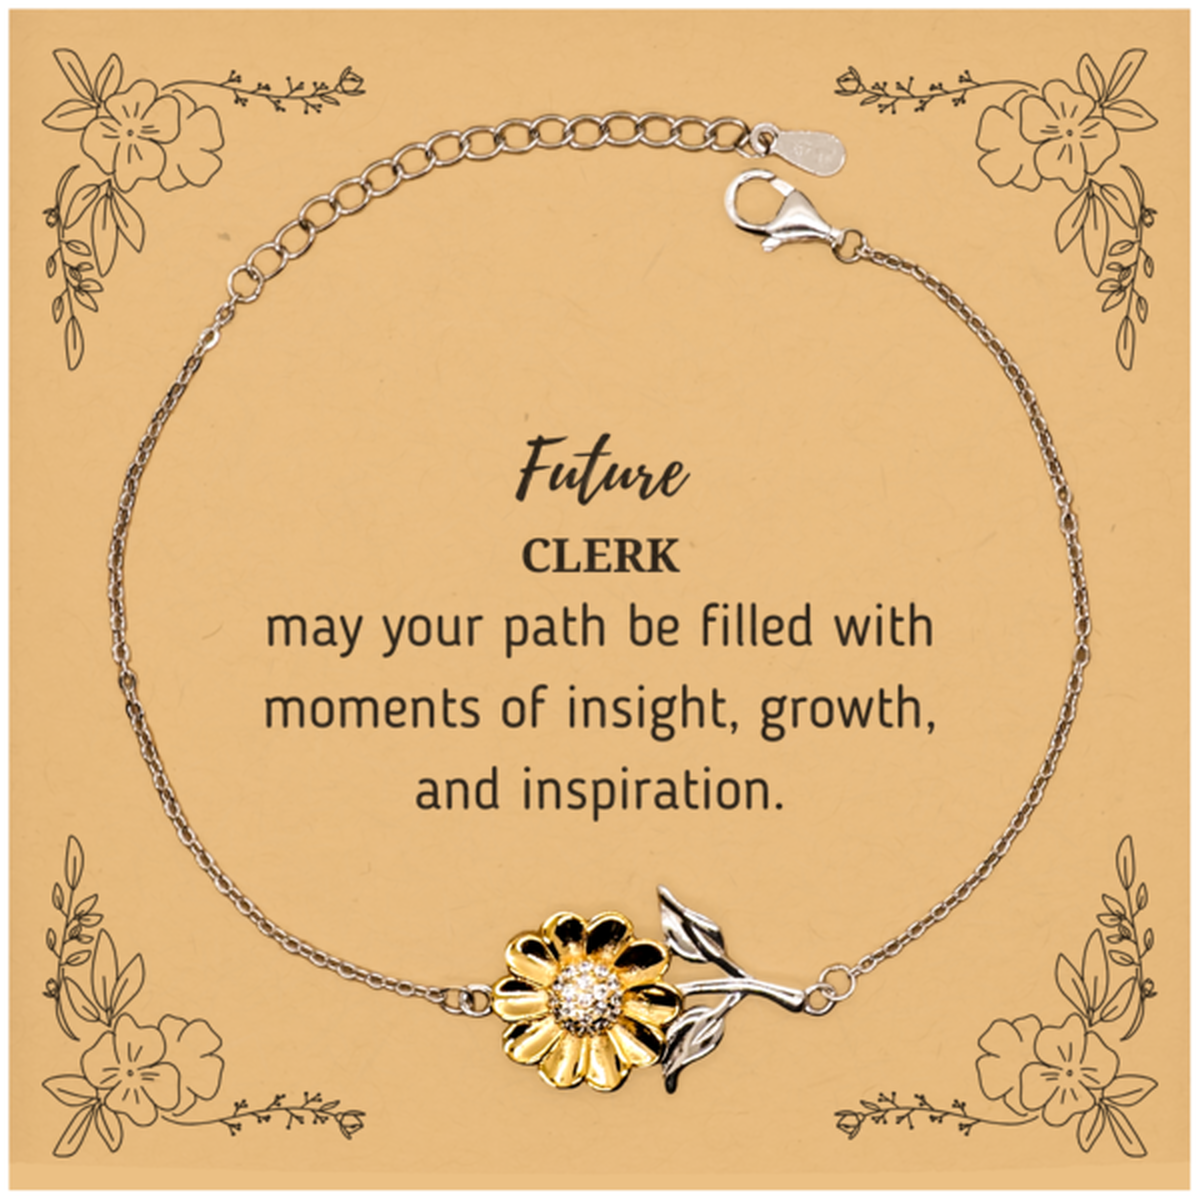 Future Clerk Gifts, May your path be filled with moments of insight, Graduation Gifts for New Clerk, Christmas Unique Sunflower Bracelet For Men, Women, Friends